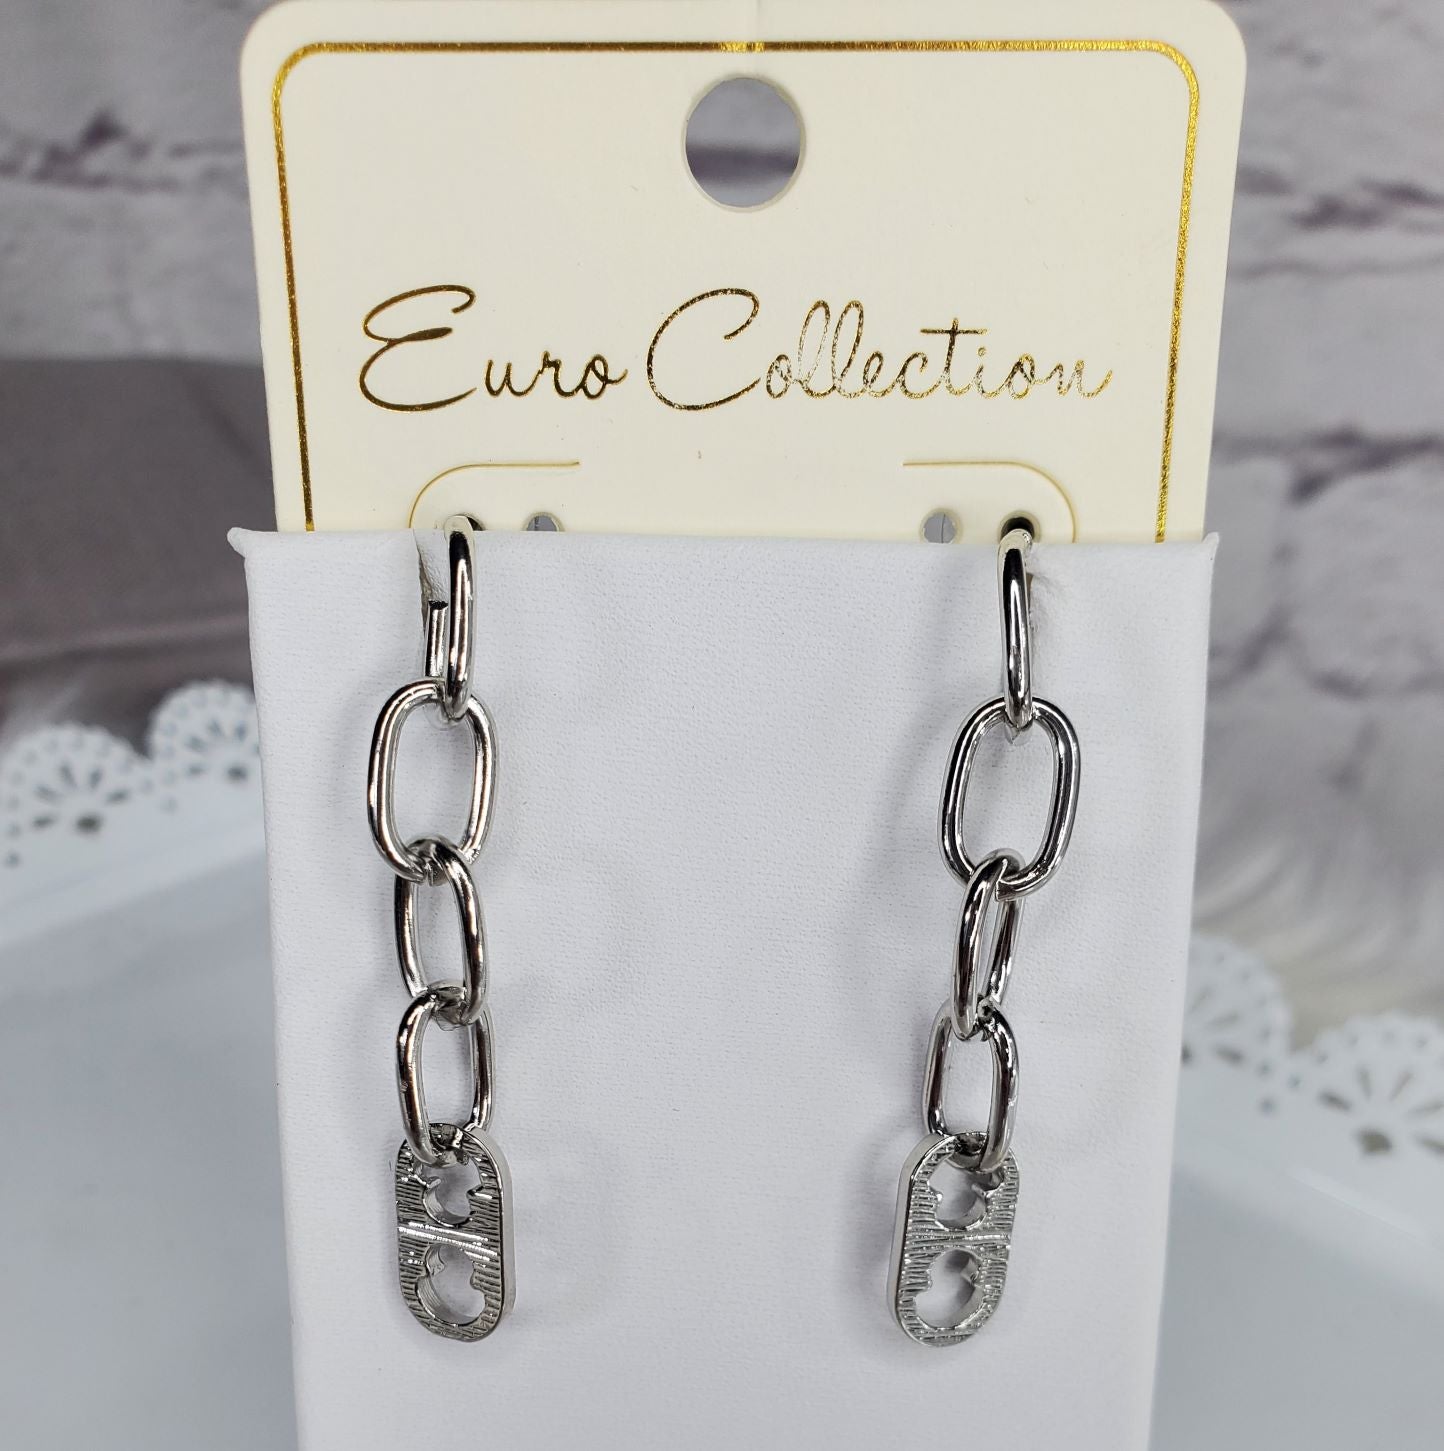 Euro Collection layered decorative chain necklace